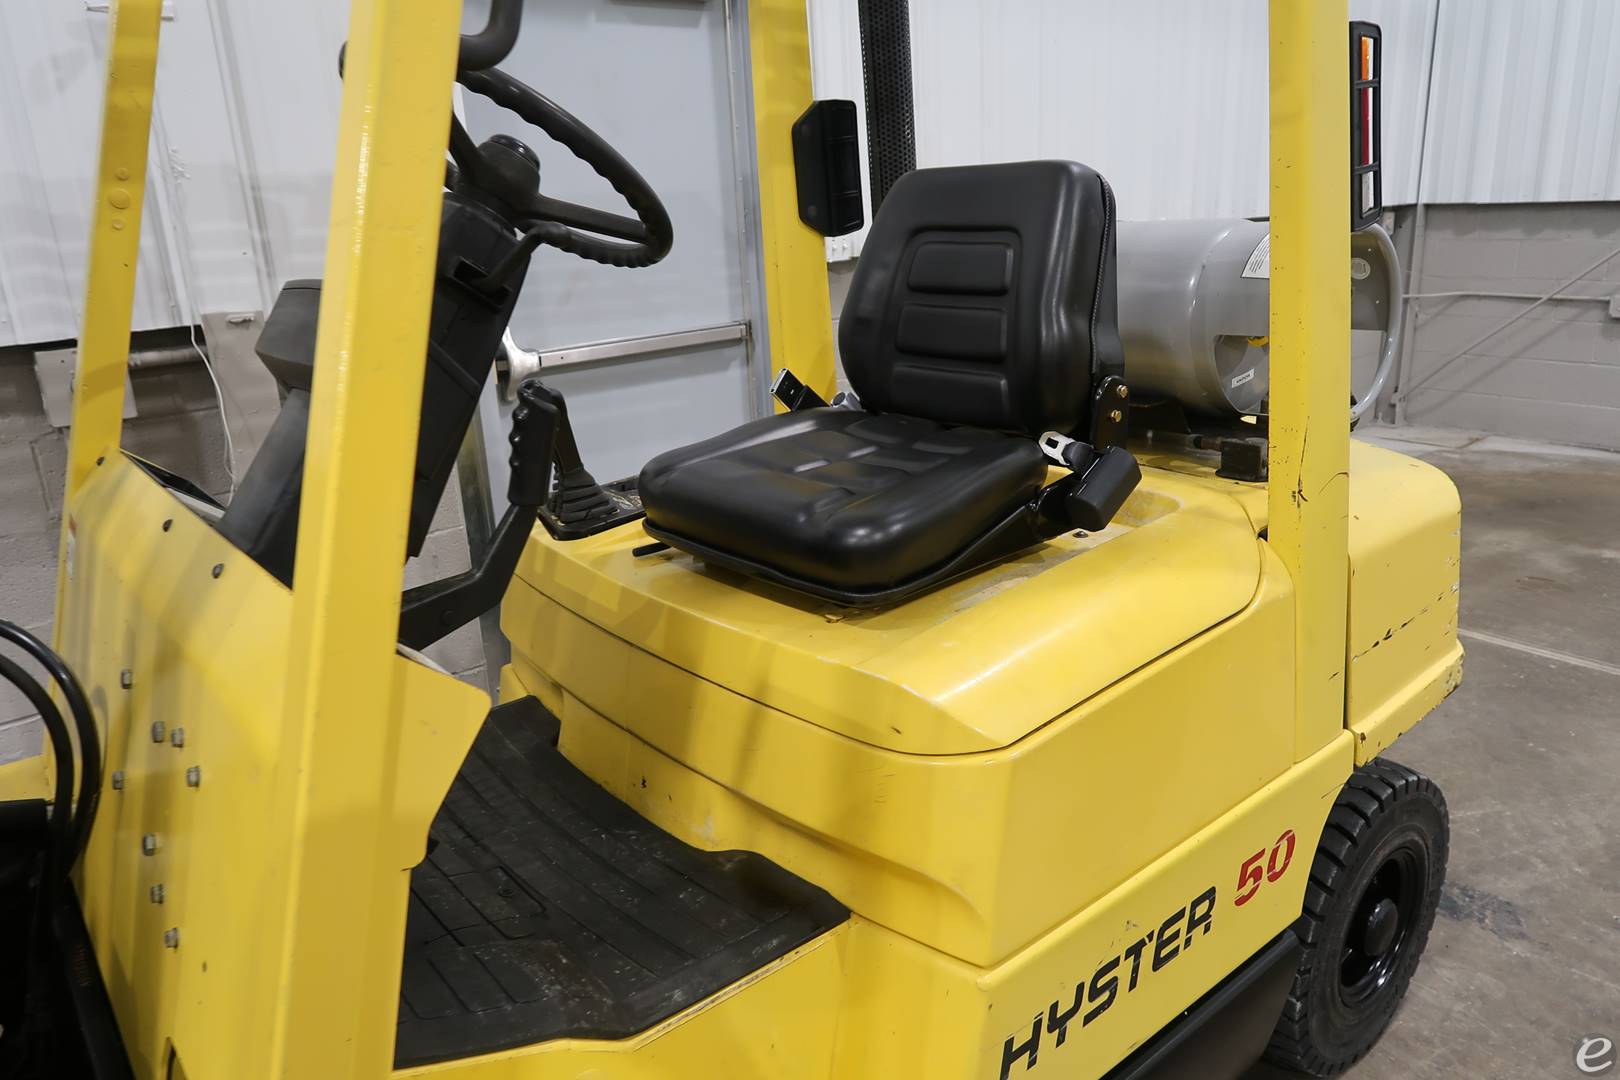 1999 Hyster H50XM